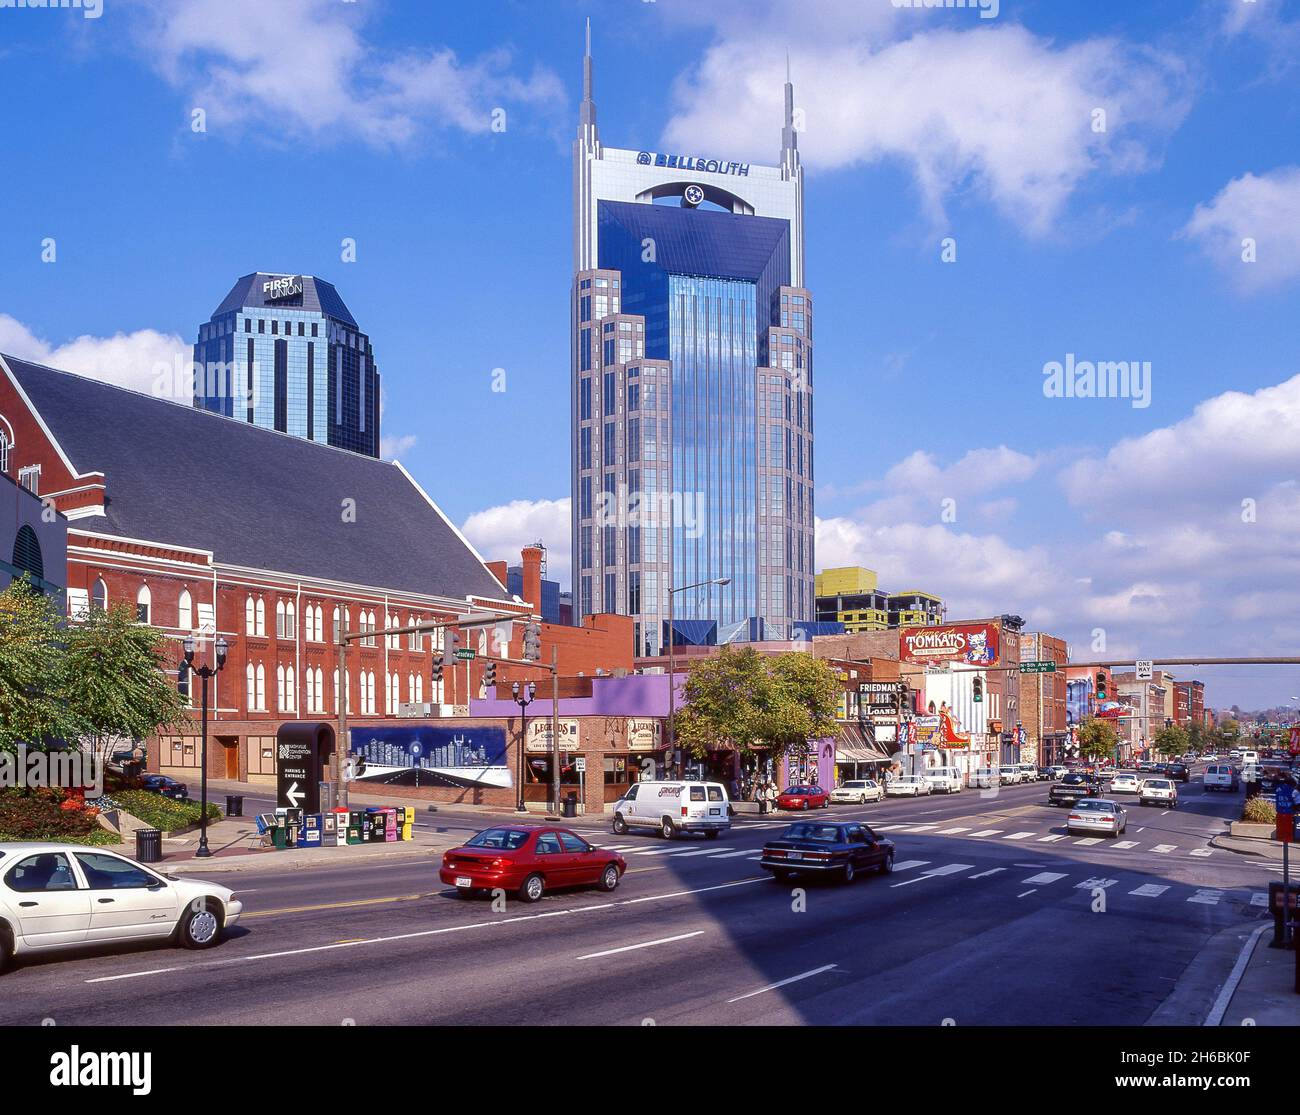 Bellsouth tower and bars, Broadway, Nashville, Tennessee, United States of America Stock Photo